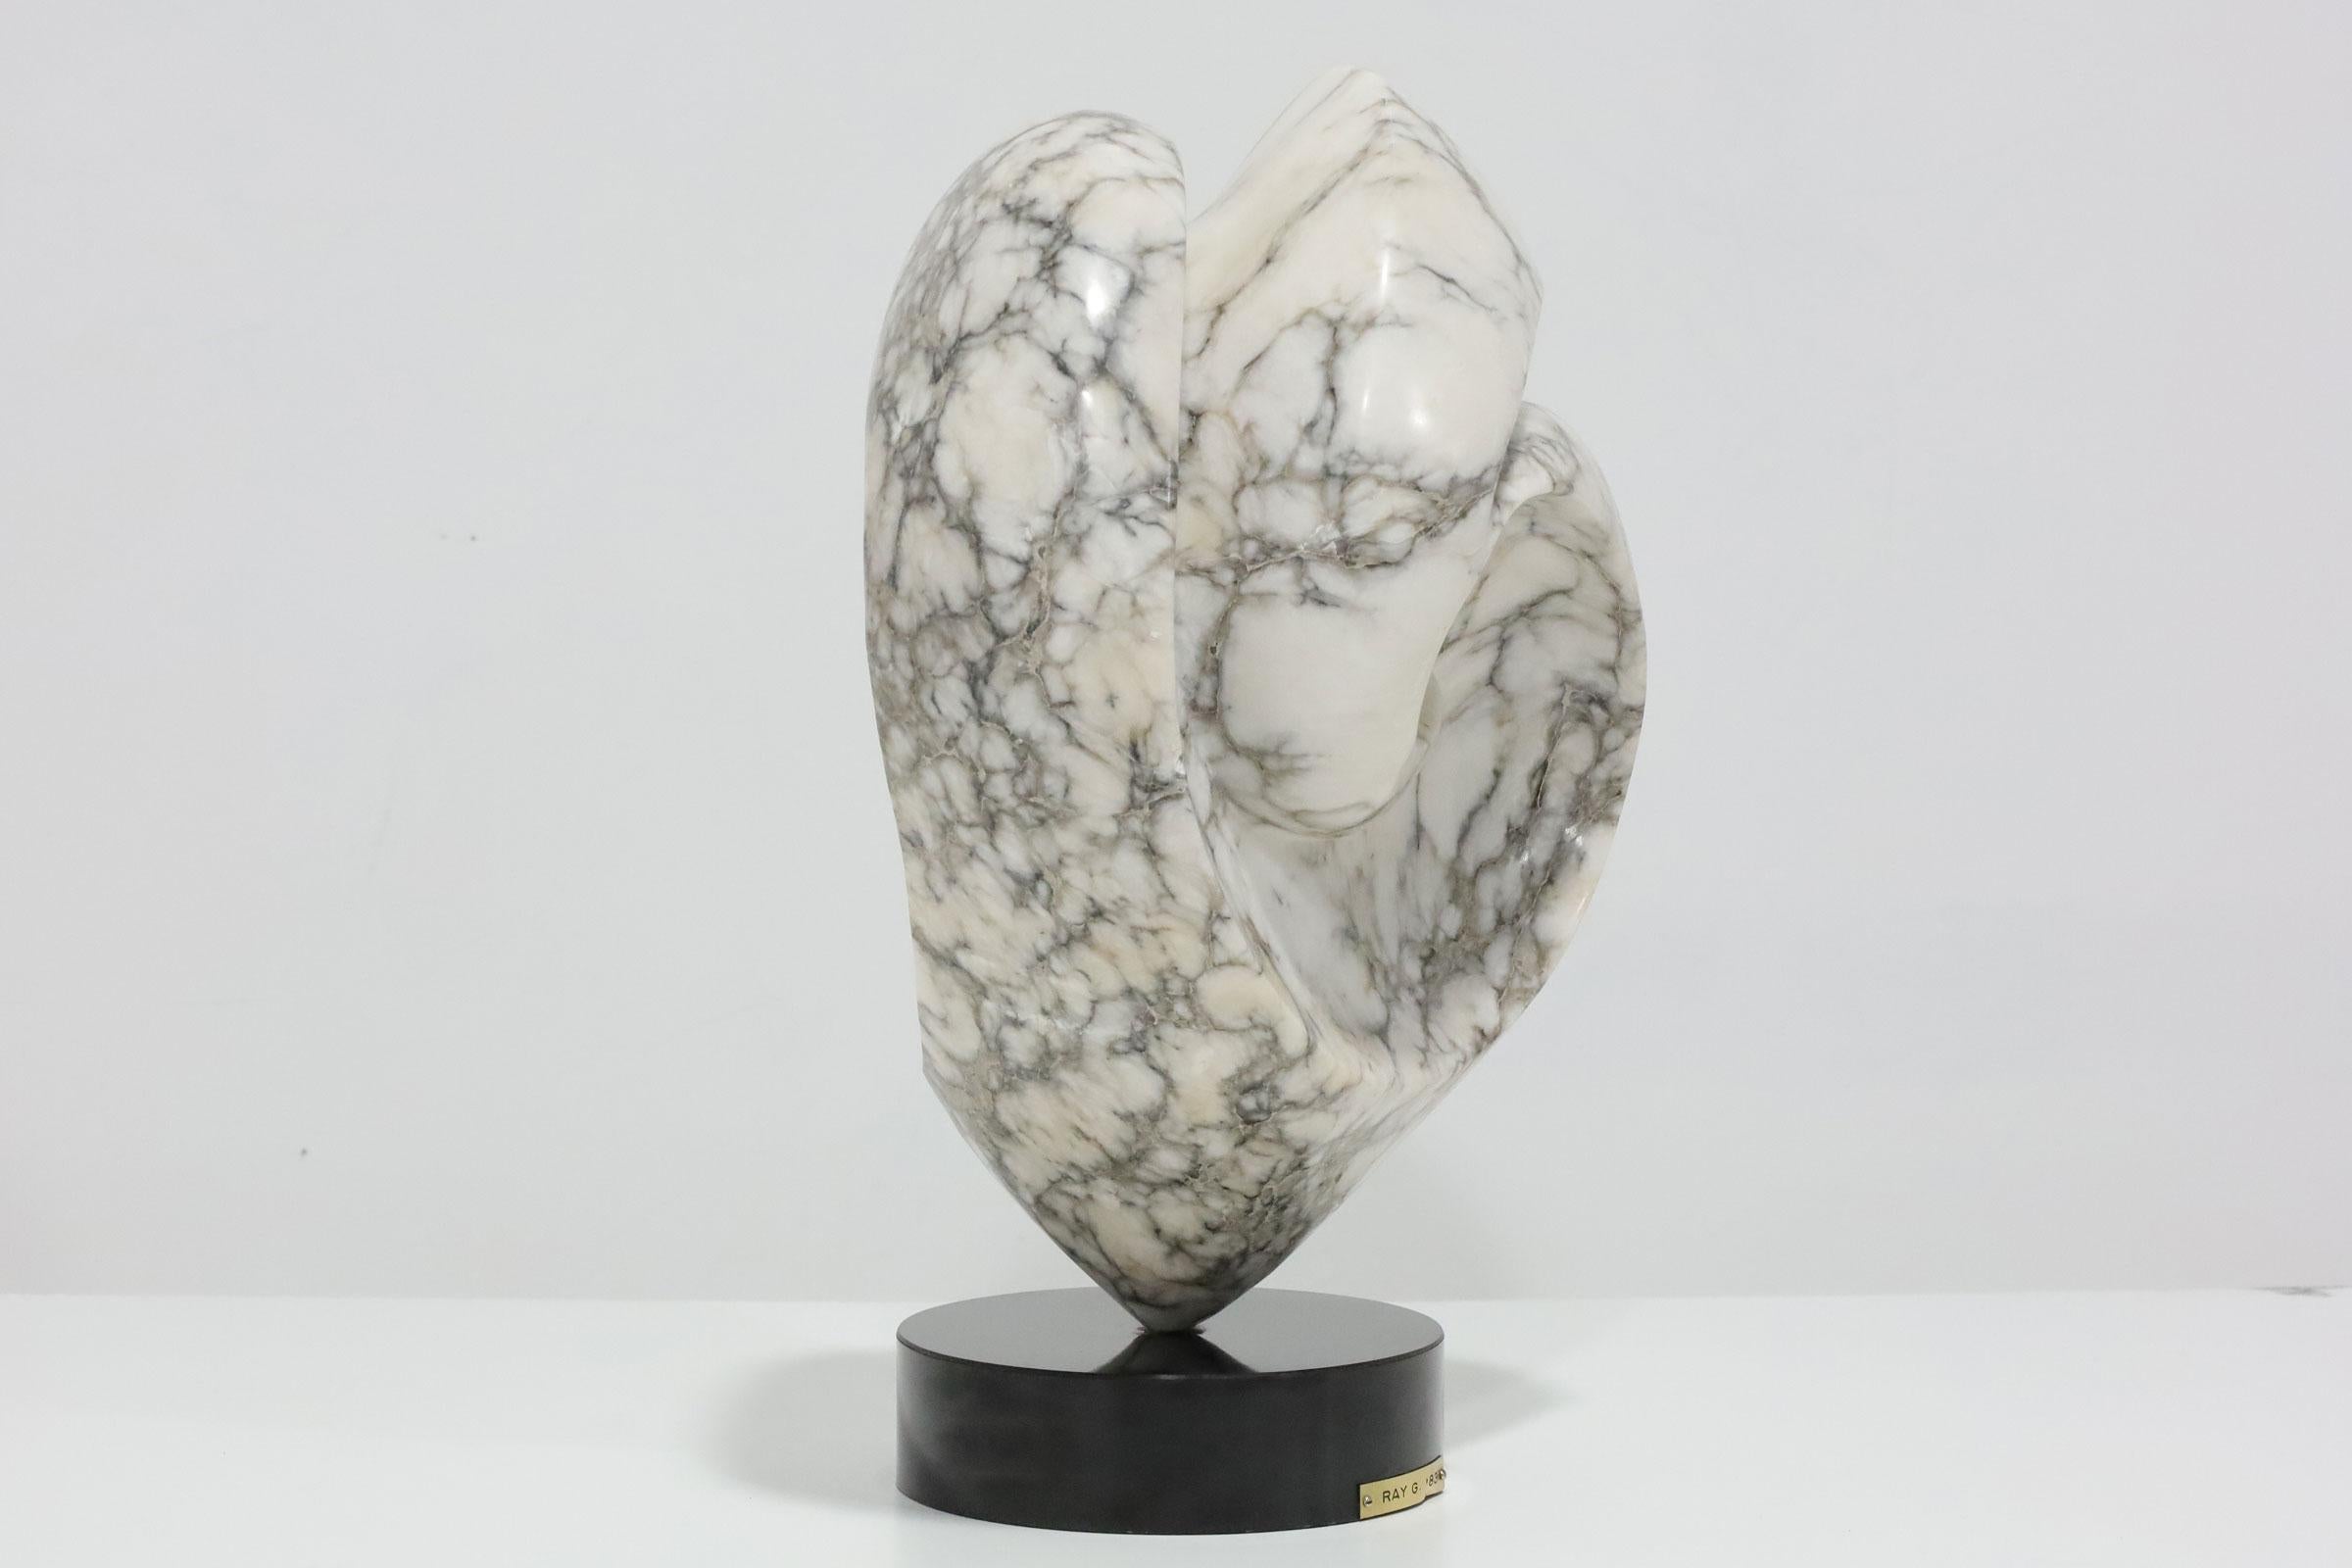 Large Mounted Abstract Black and White Marble Sculpture Signed Ray G. 1983 In Good Condition For Sale In Dallas, TX